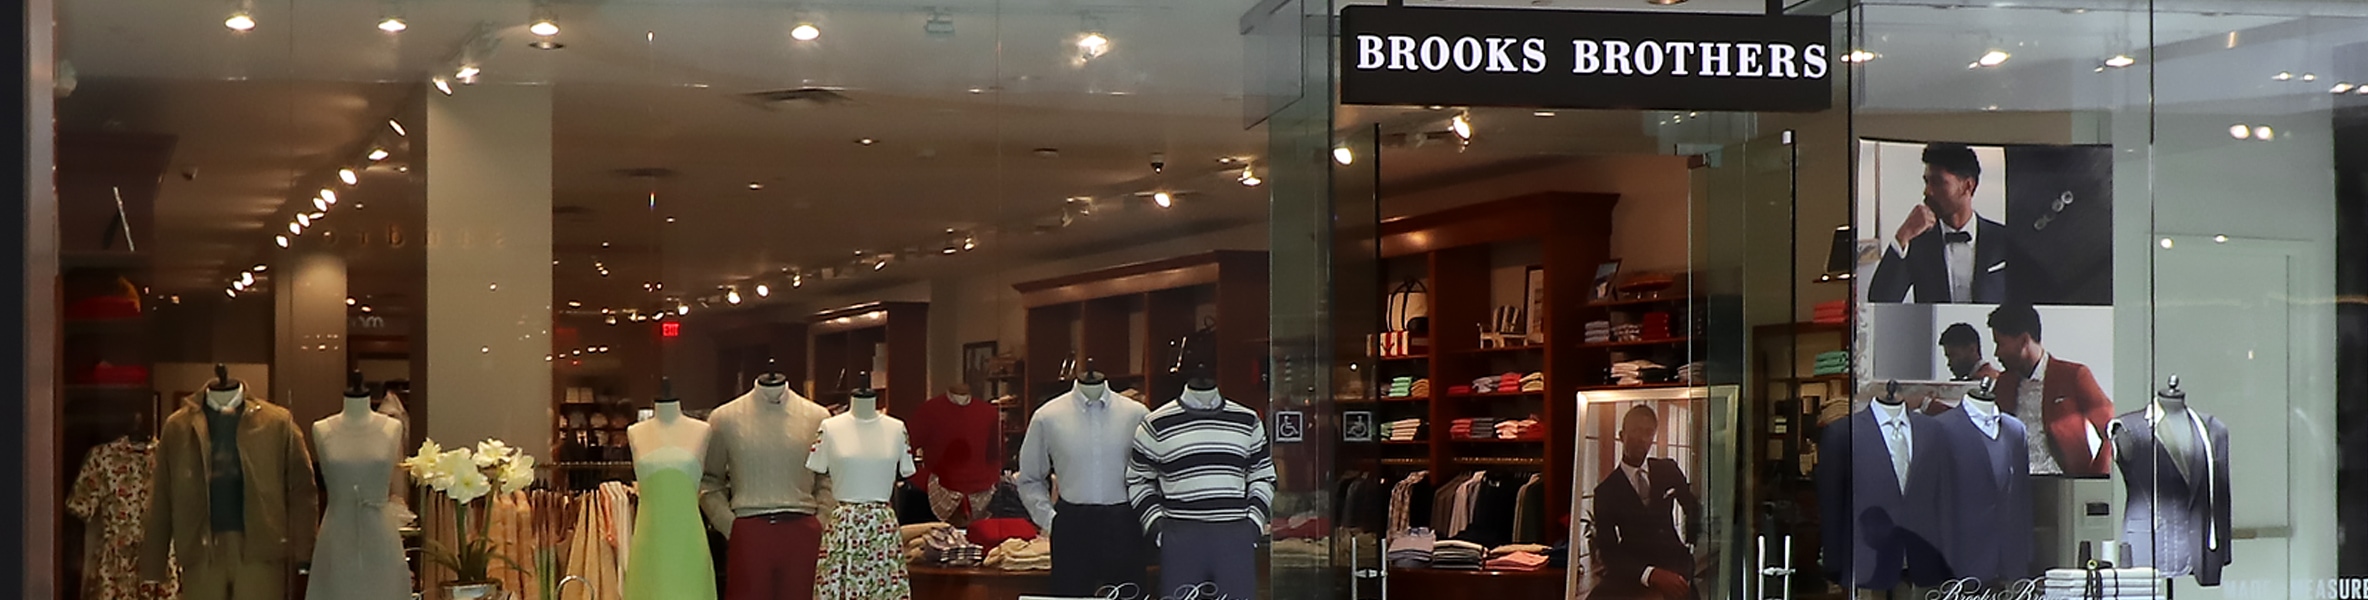 beverly center brooks brothers